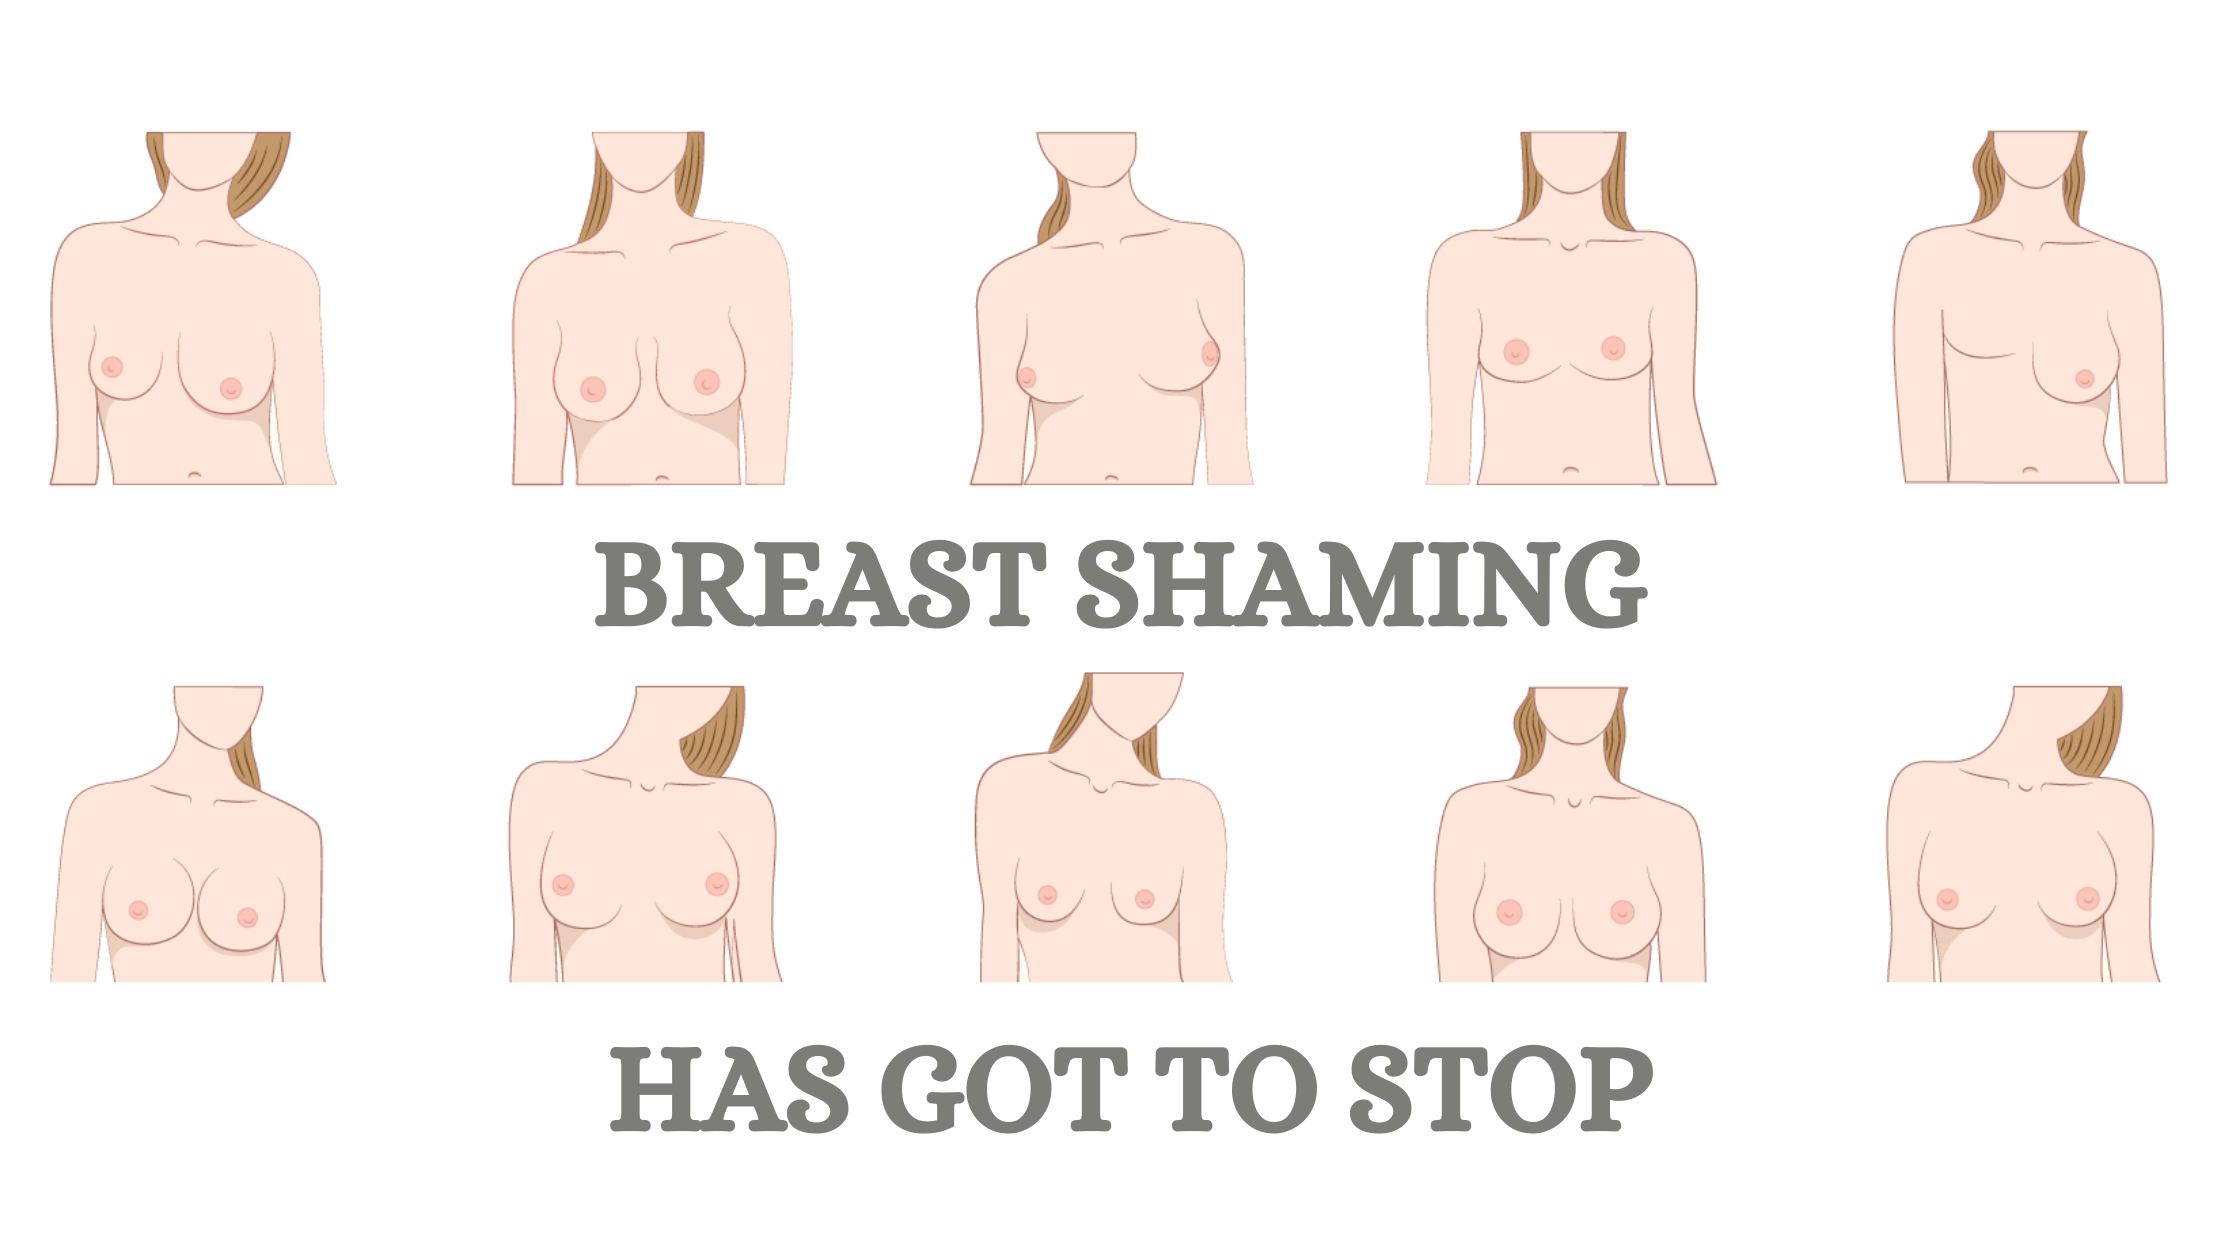 Boob shamers are the real boobs